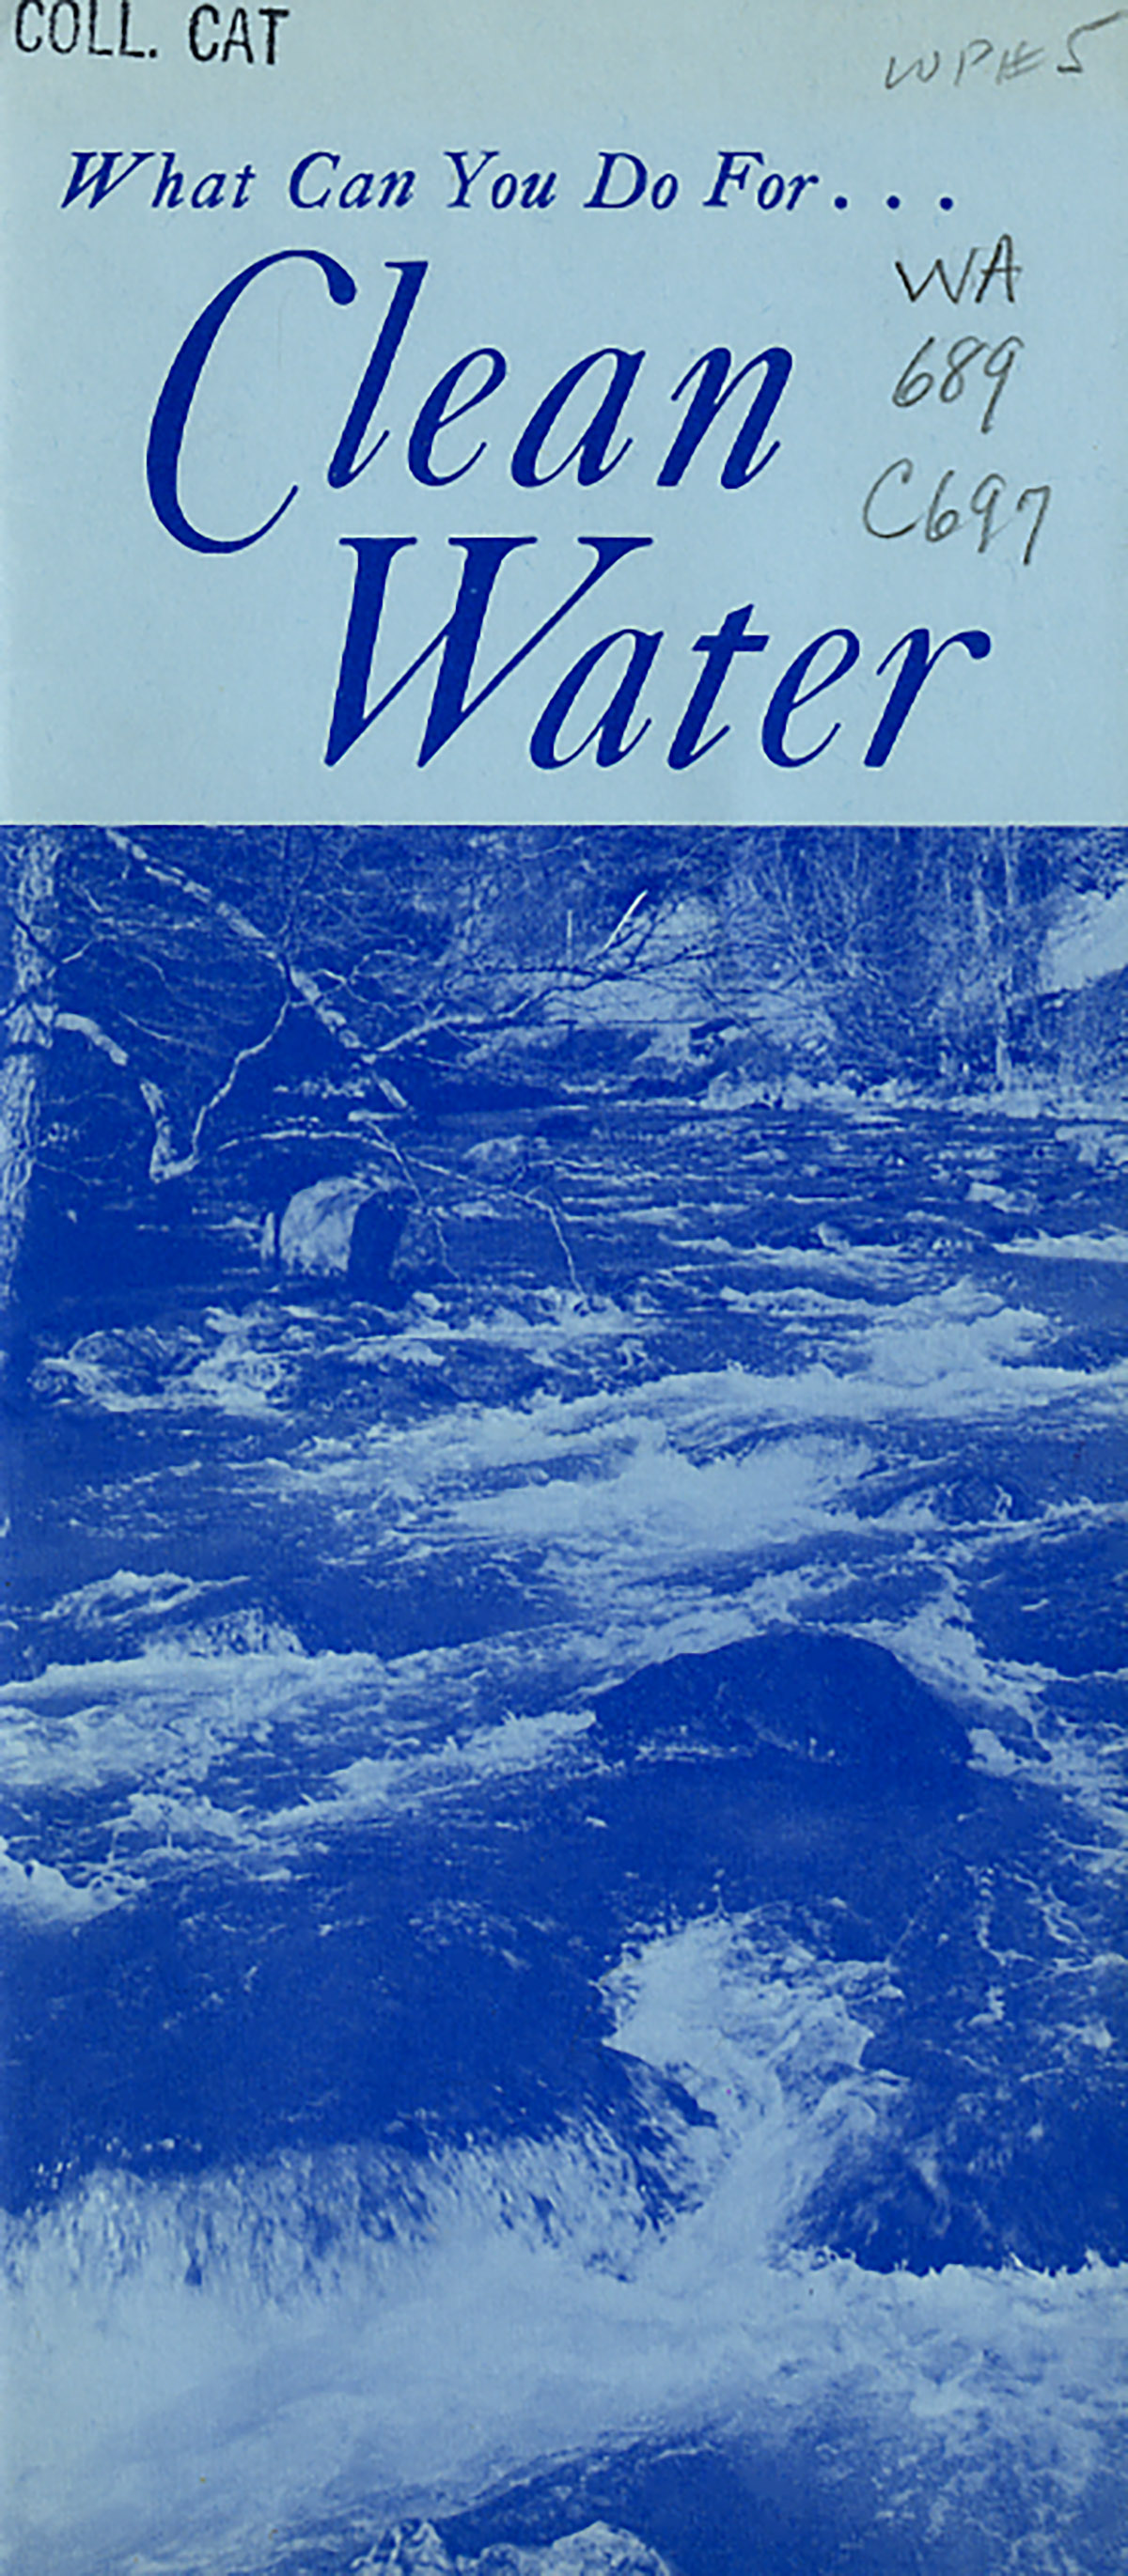 A pamphlet cover with a blue image of a stream.